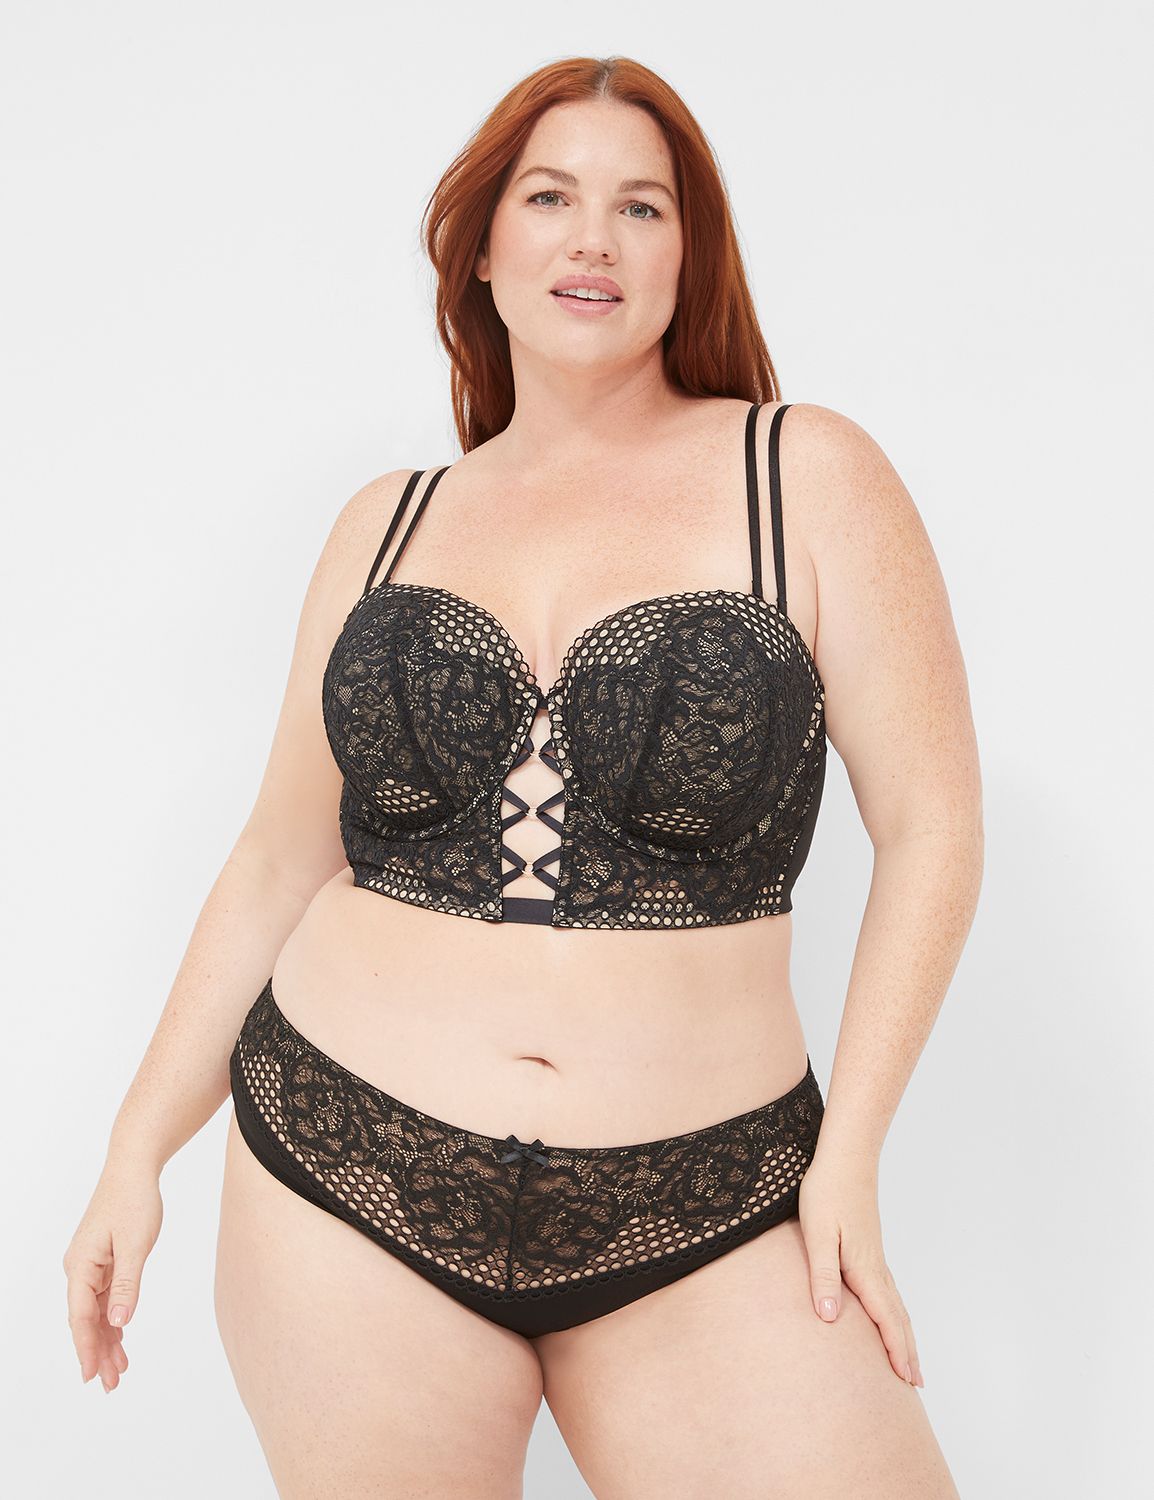 Lane Bryant New Cacique Multi-Way Boost Strapless Bra 7 Ways In Café Size  38DDD Tan - $45 - From Always